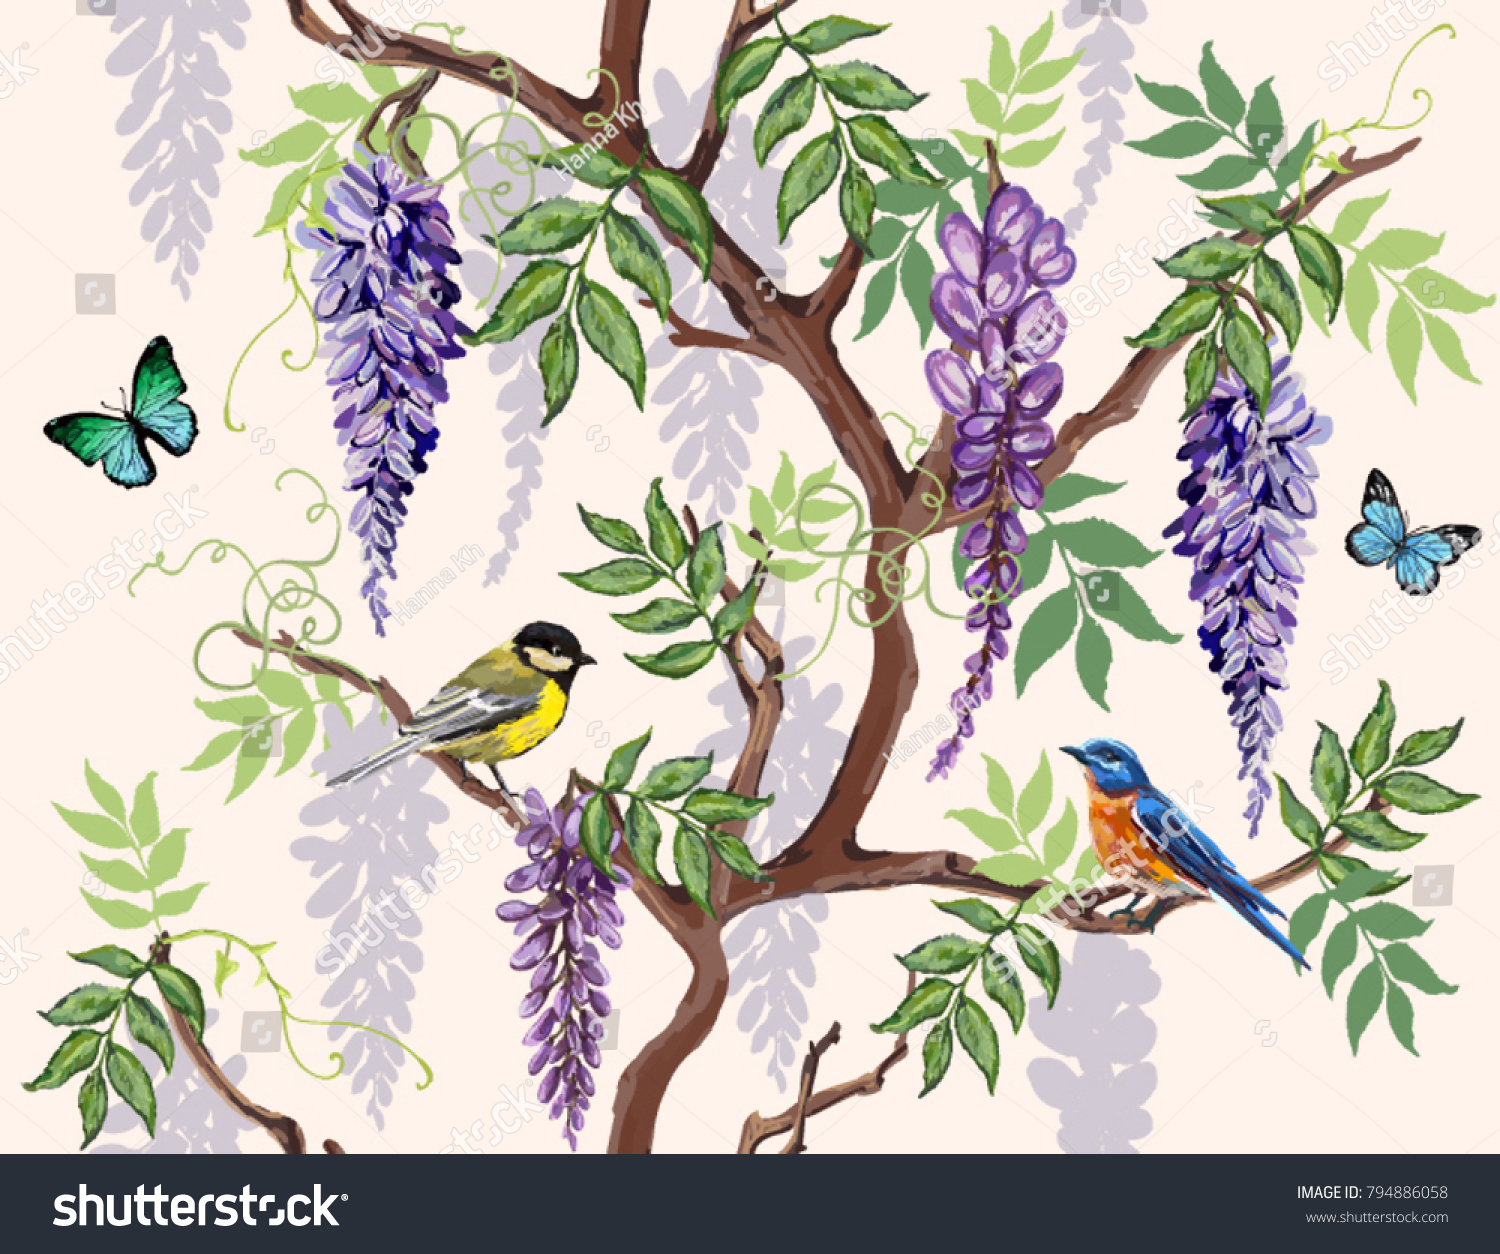 SVG of Seamless vector floral summer pattern background with tropical japanese flowers, birds, butterflies, wisteria. Perfect for wallpapers, web page backgrounds, surface textures, textile. svg